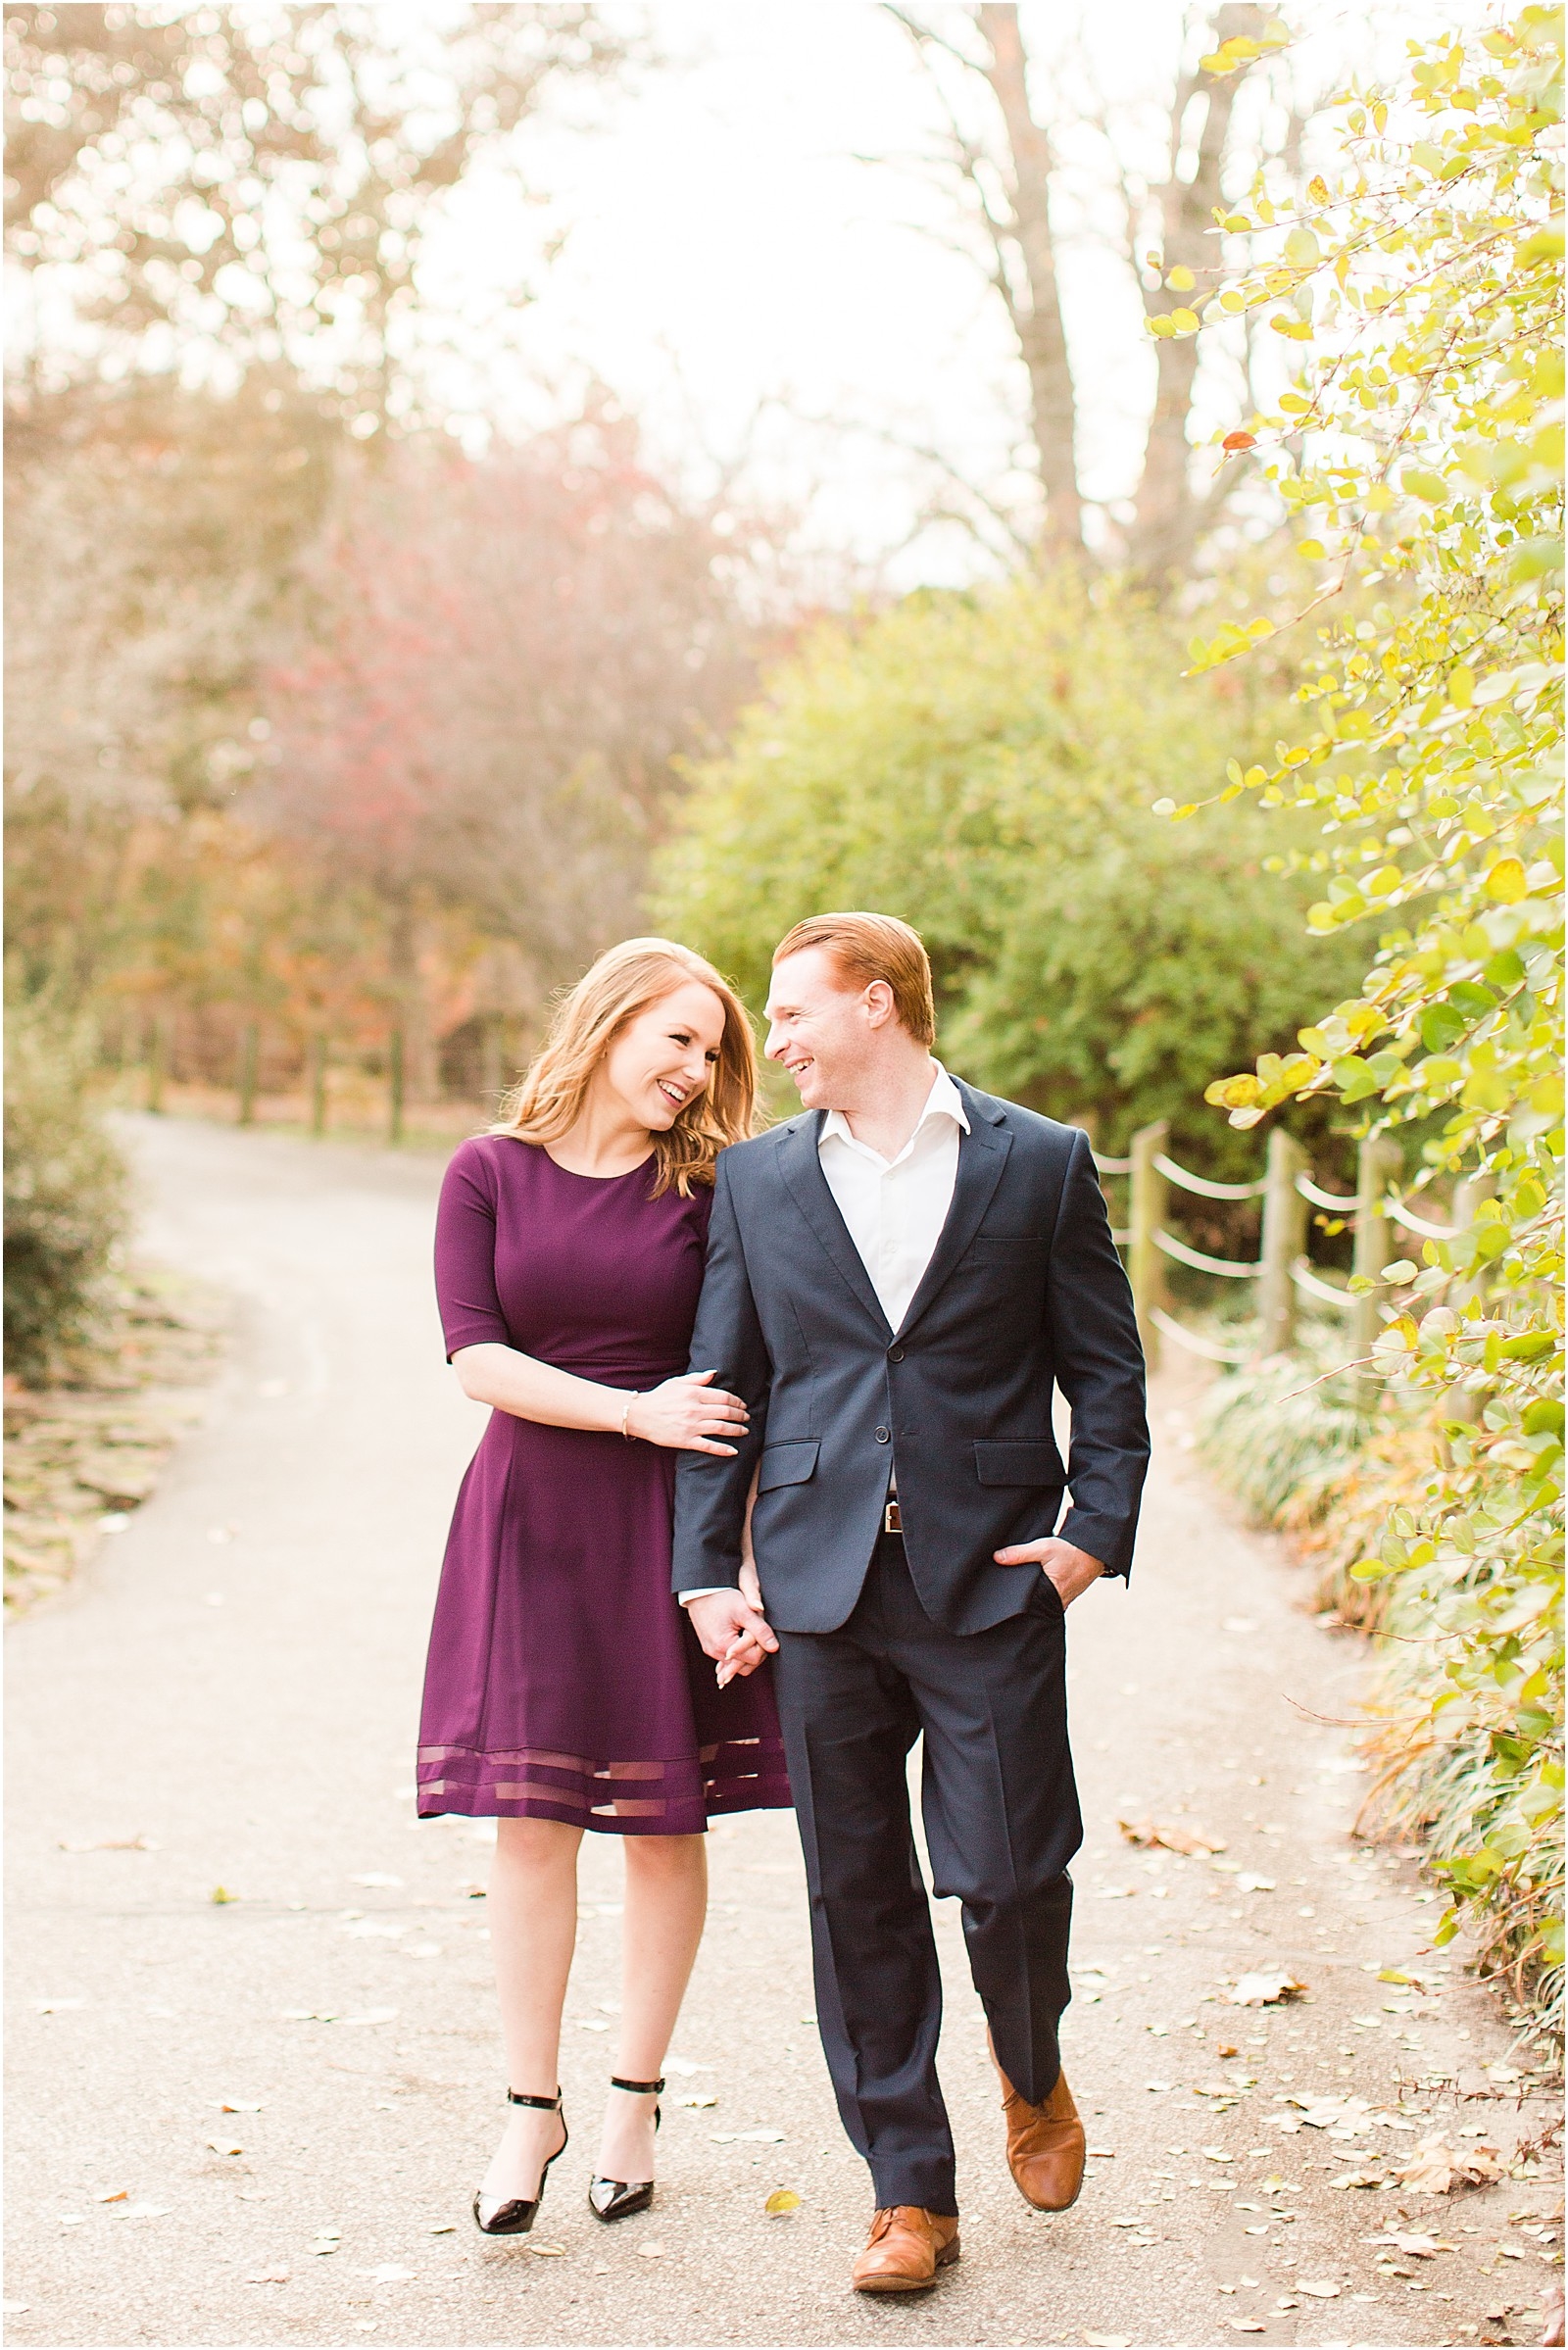 A Mesker Park Zoo Engagement Session | Jennah and Steve | Bret and Brandie Photography015.jpg